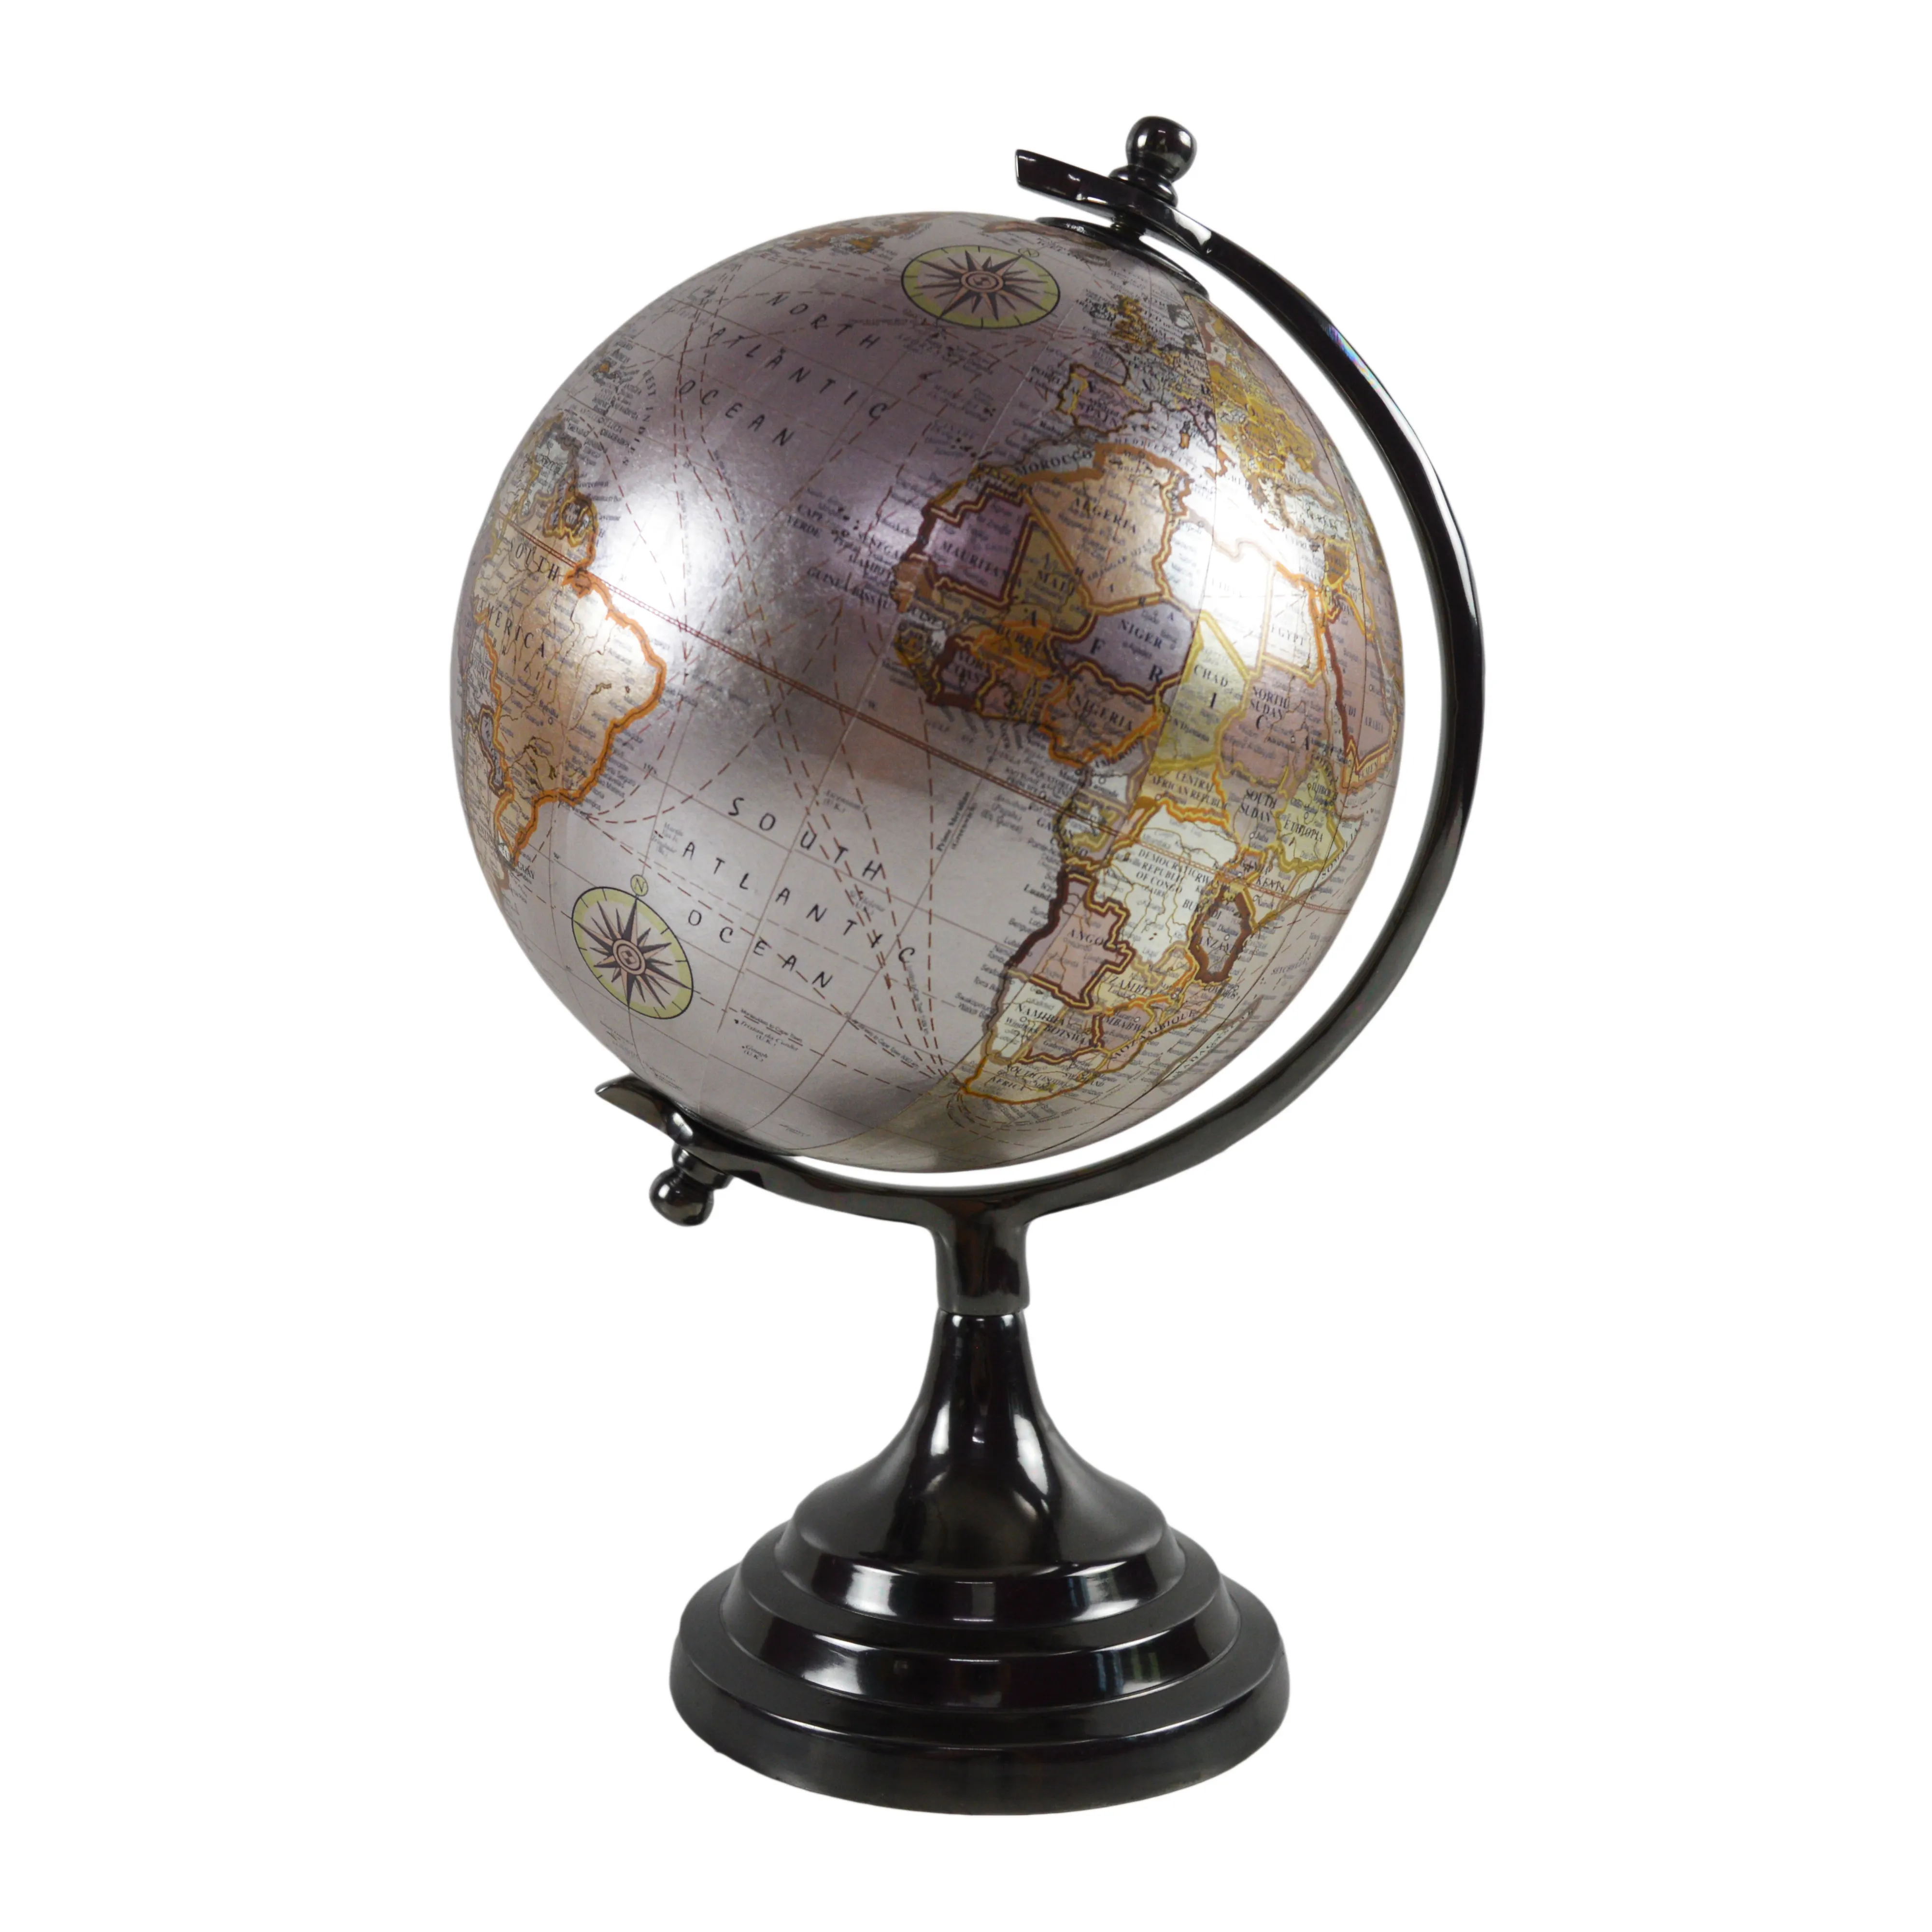 Modern Theme Office Design World Map Metal Globe With Stand For Tableware Office Lab And School Designs Geography